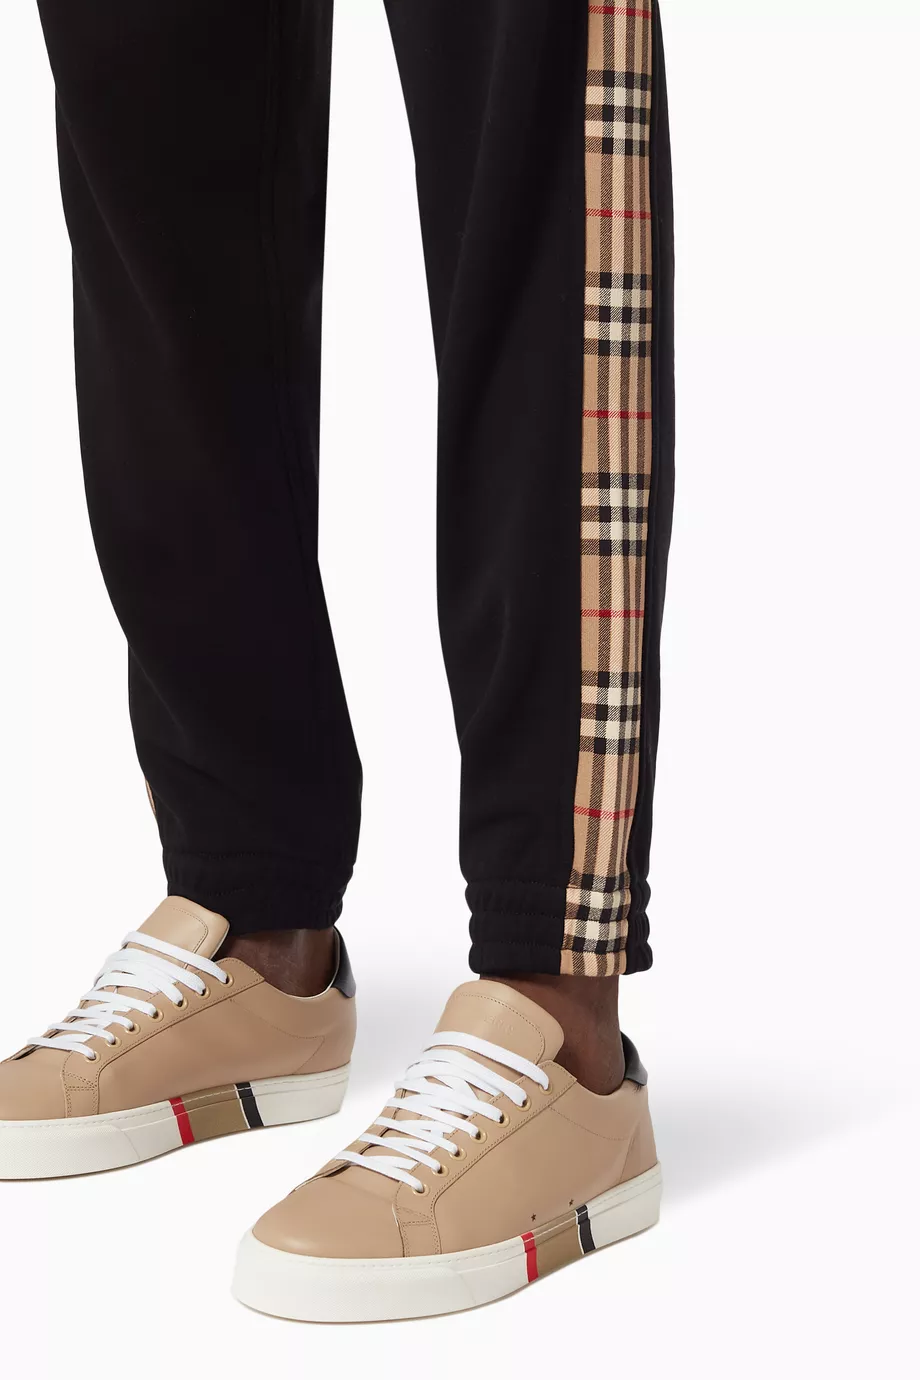 Burberry Vintage Check Panel Track Pants in Black